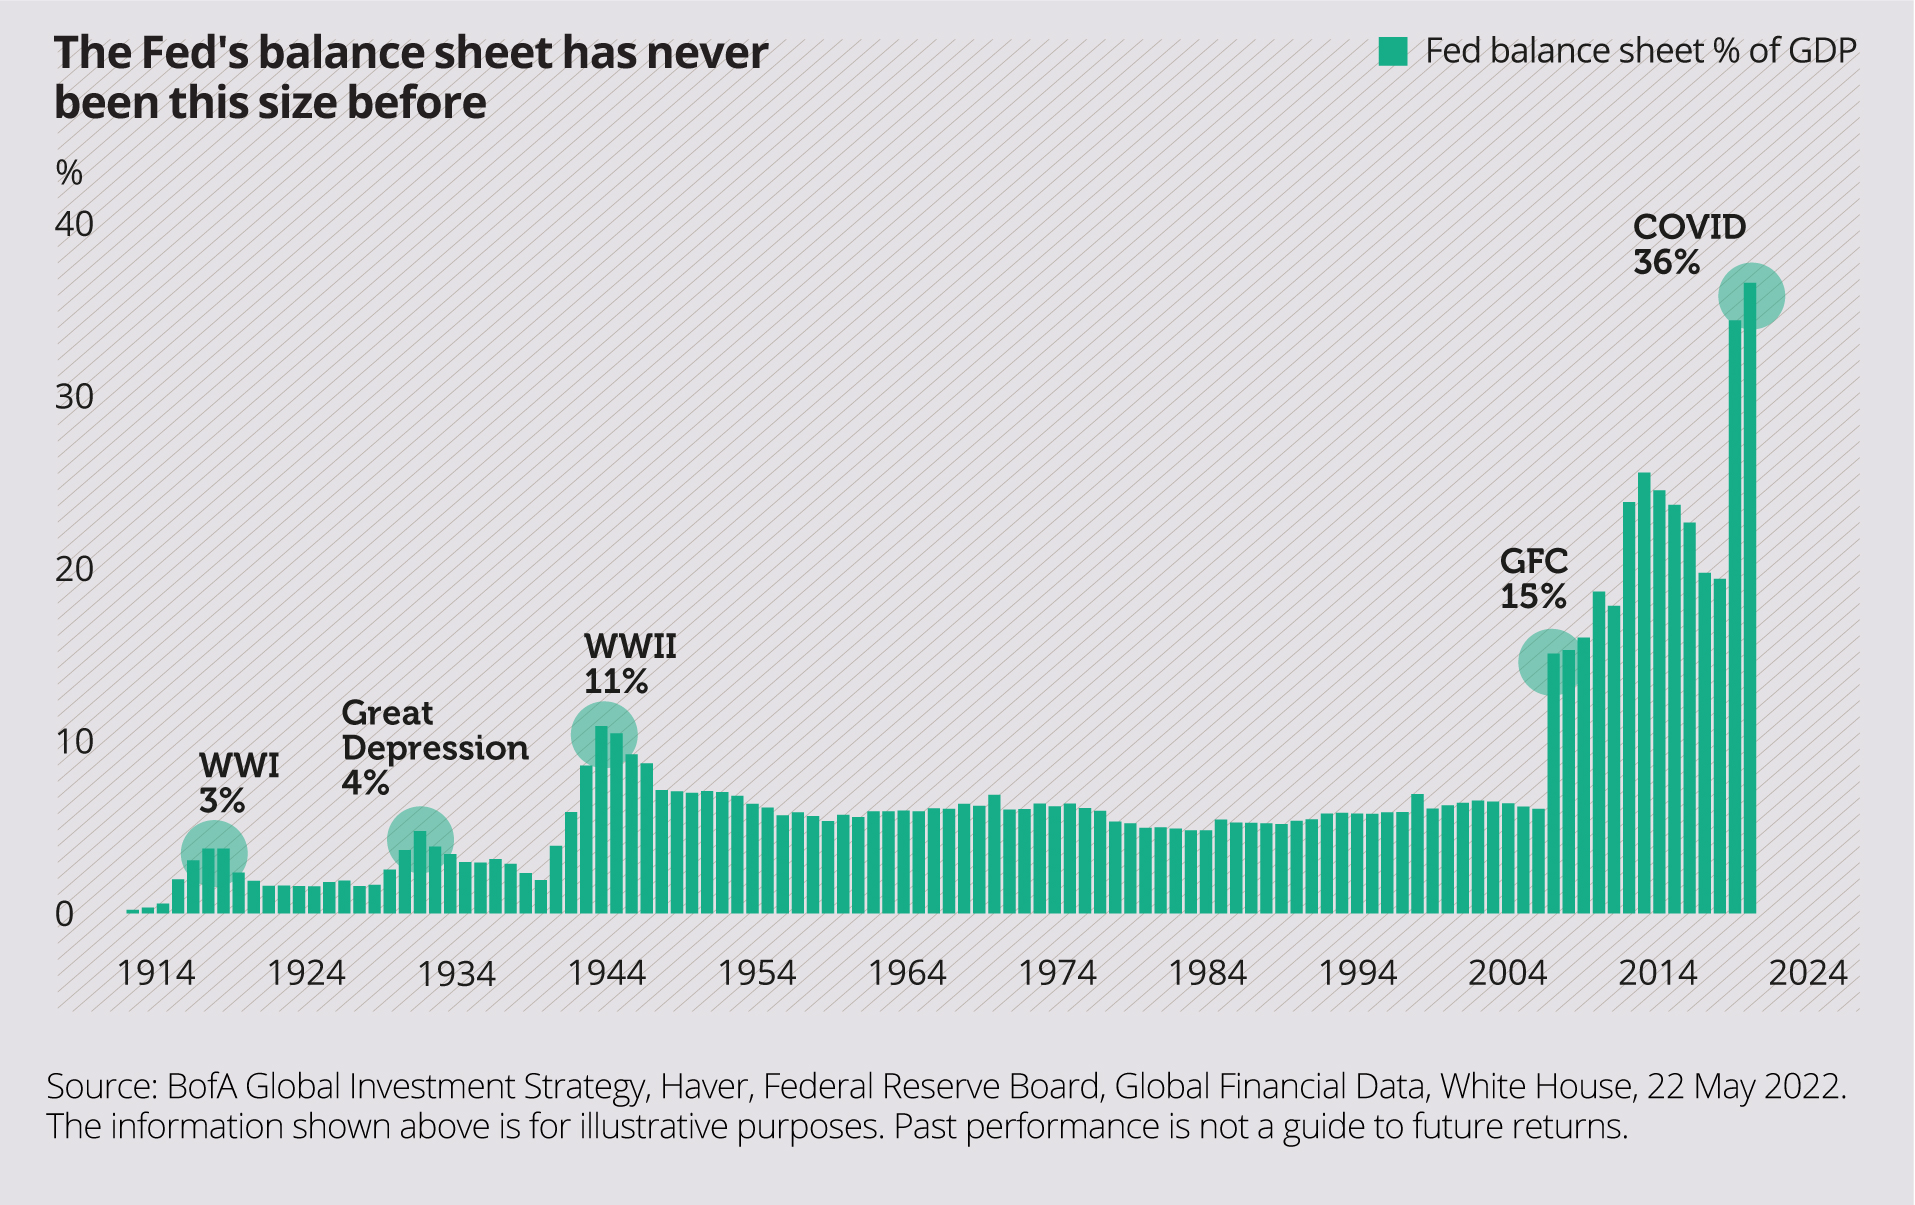 The Fed's balance sheet has never been this size before